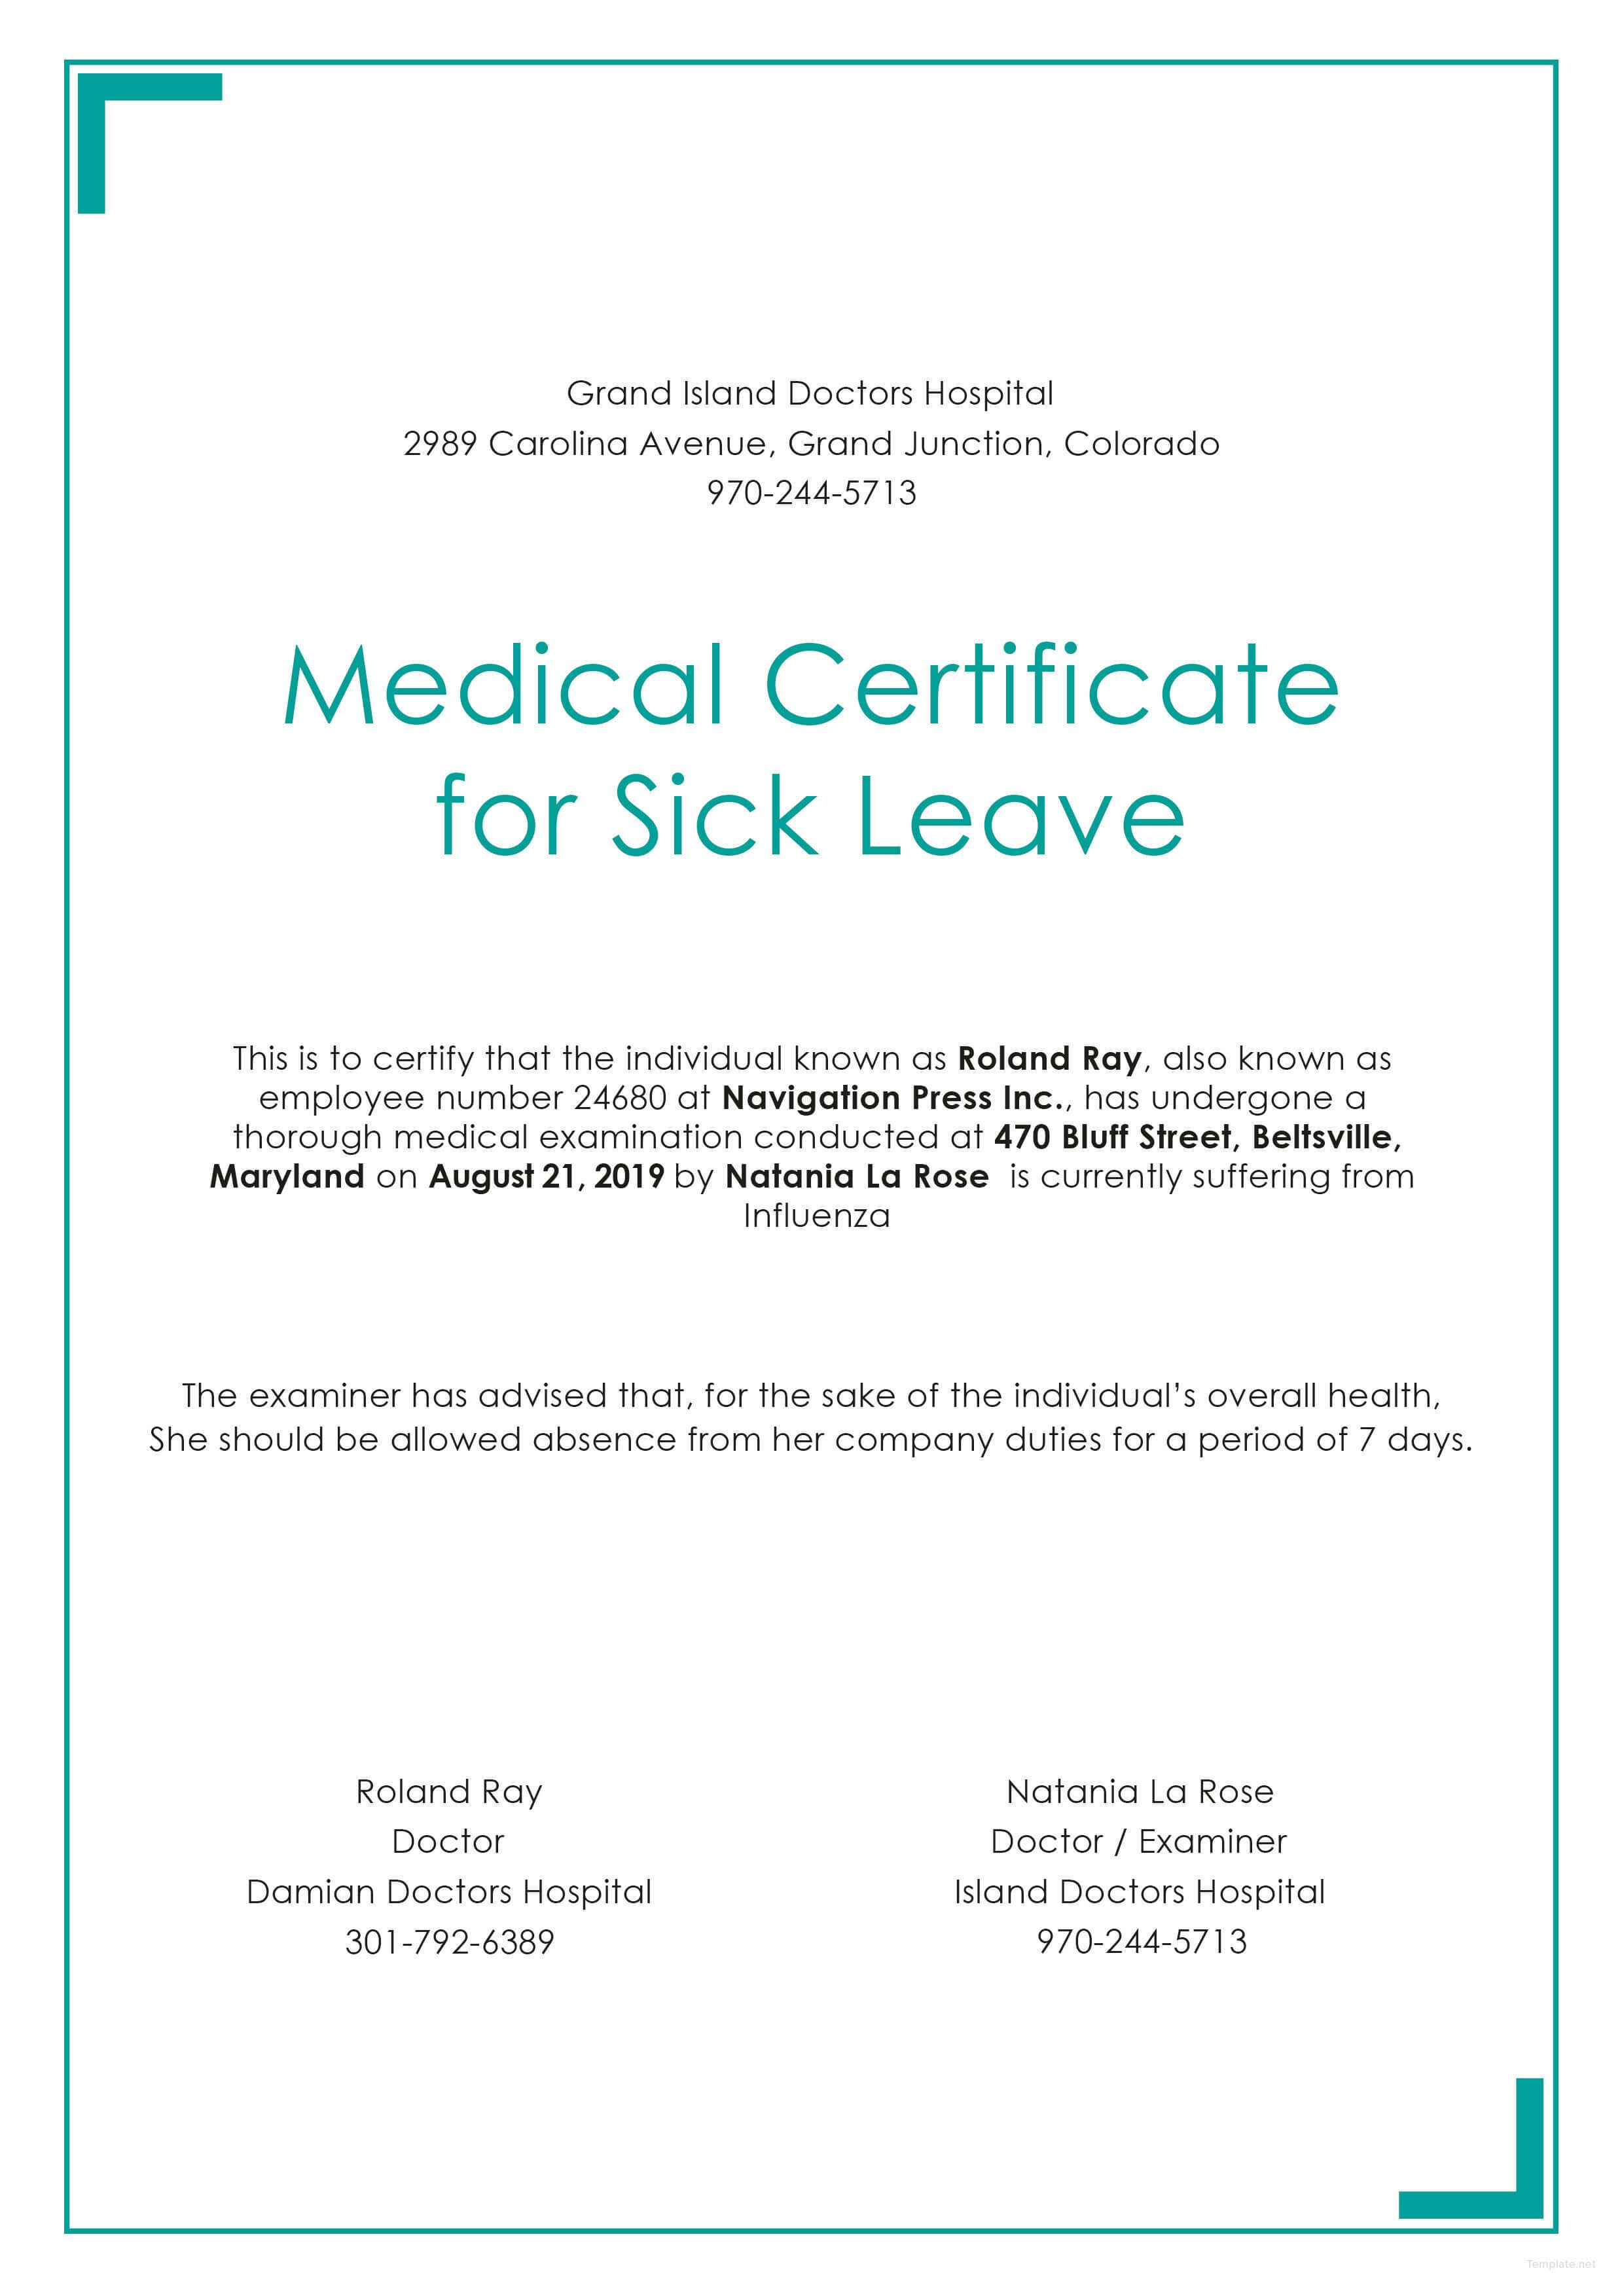 Free Medical Certificate For Sick Leave | Medical, Doctors In Free Fake Medical Certificate Template